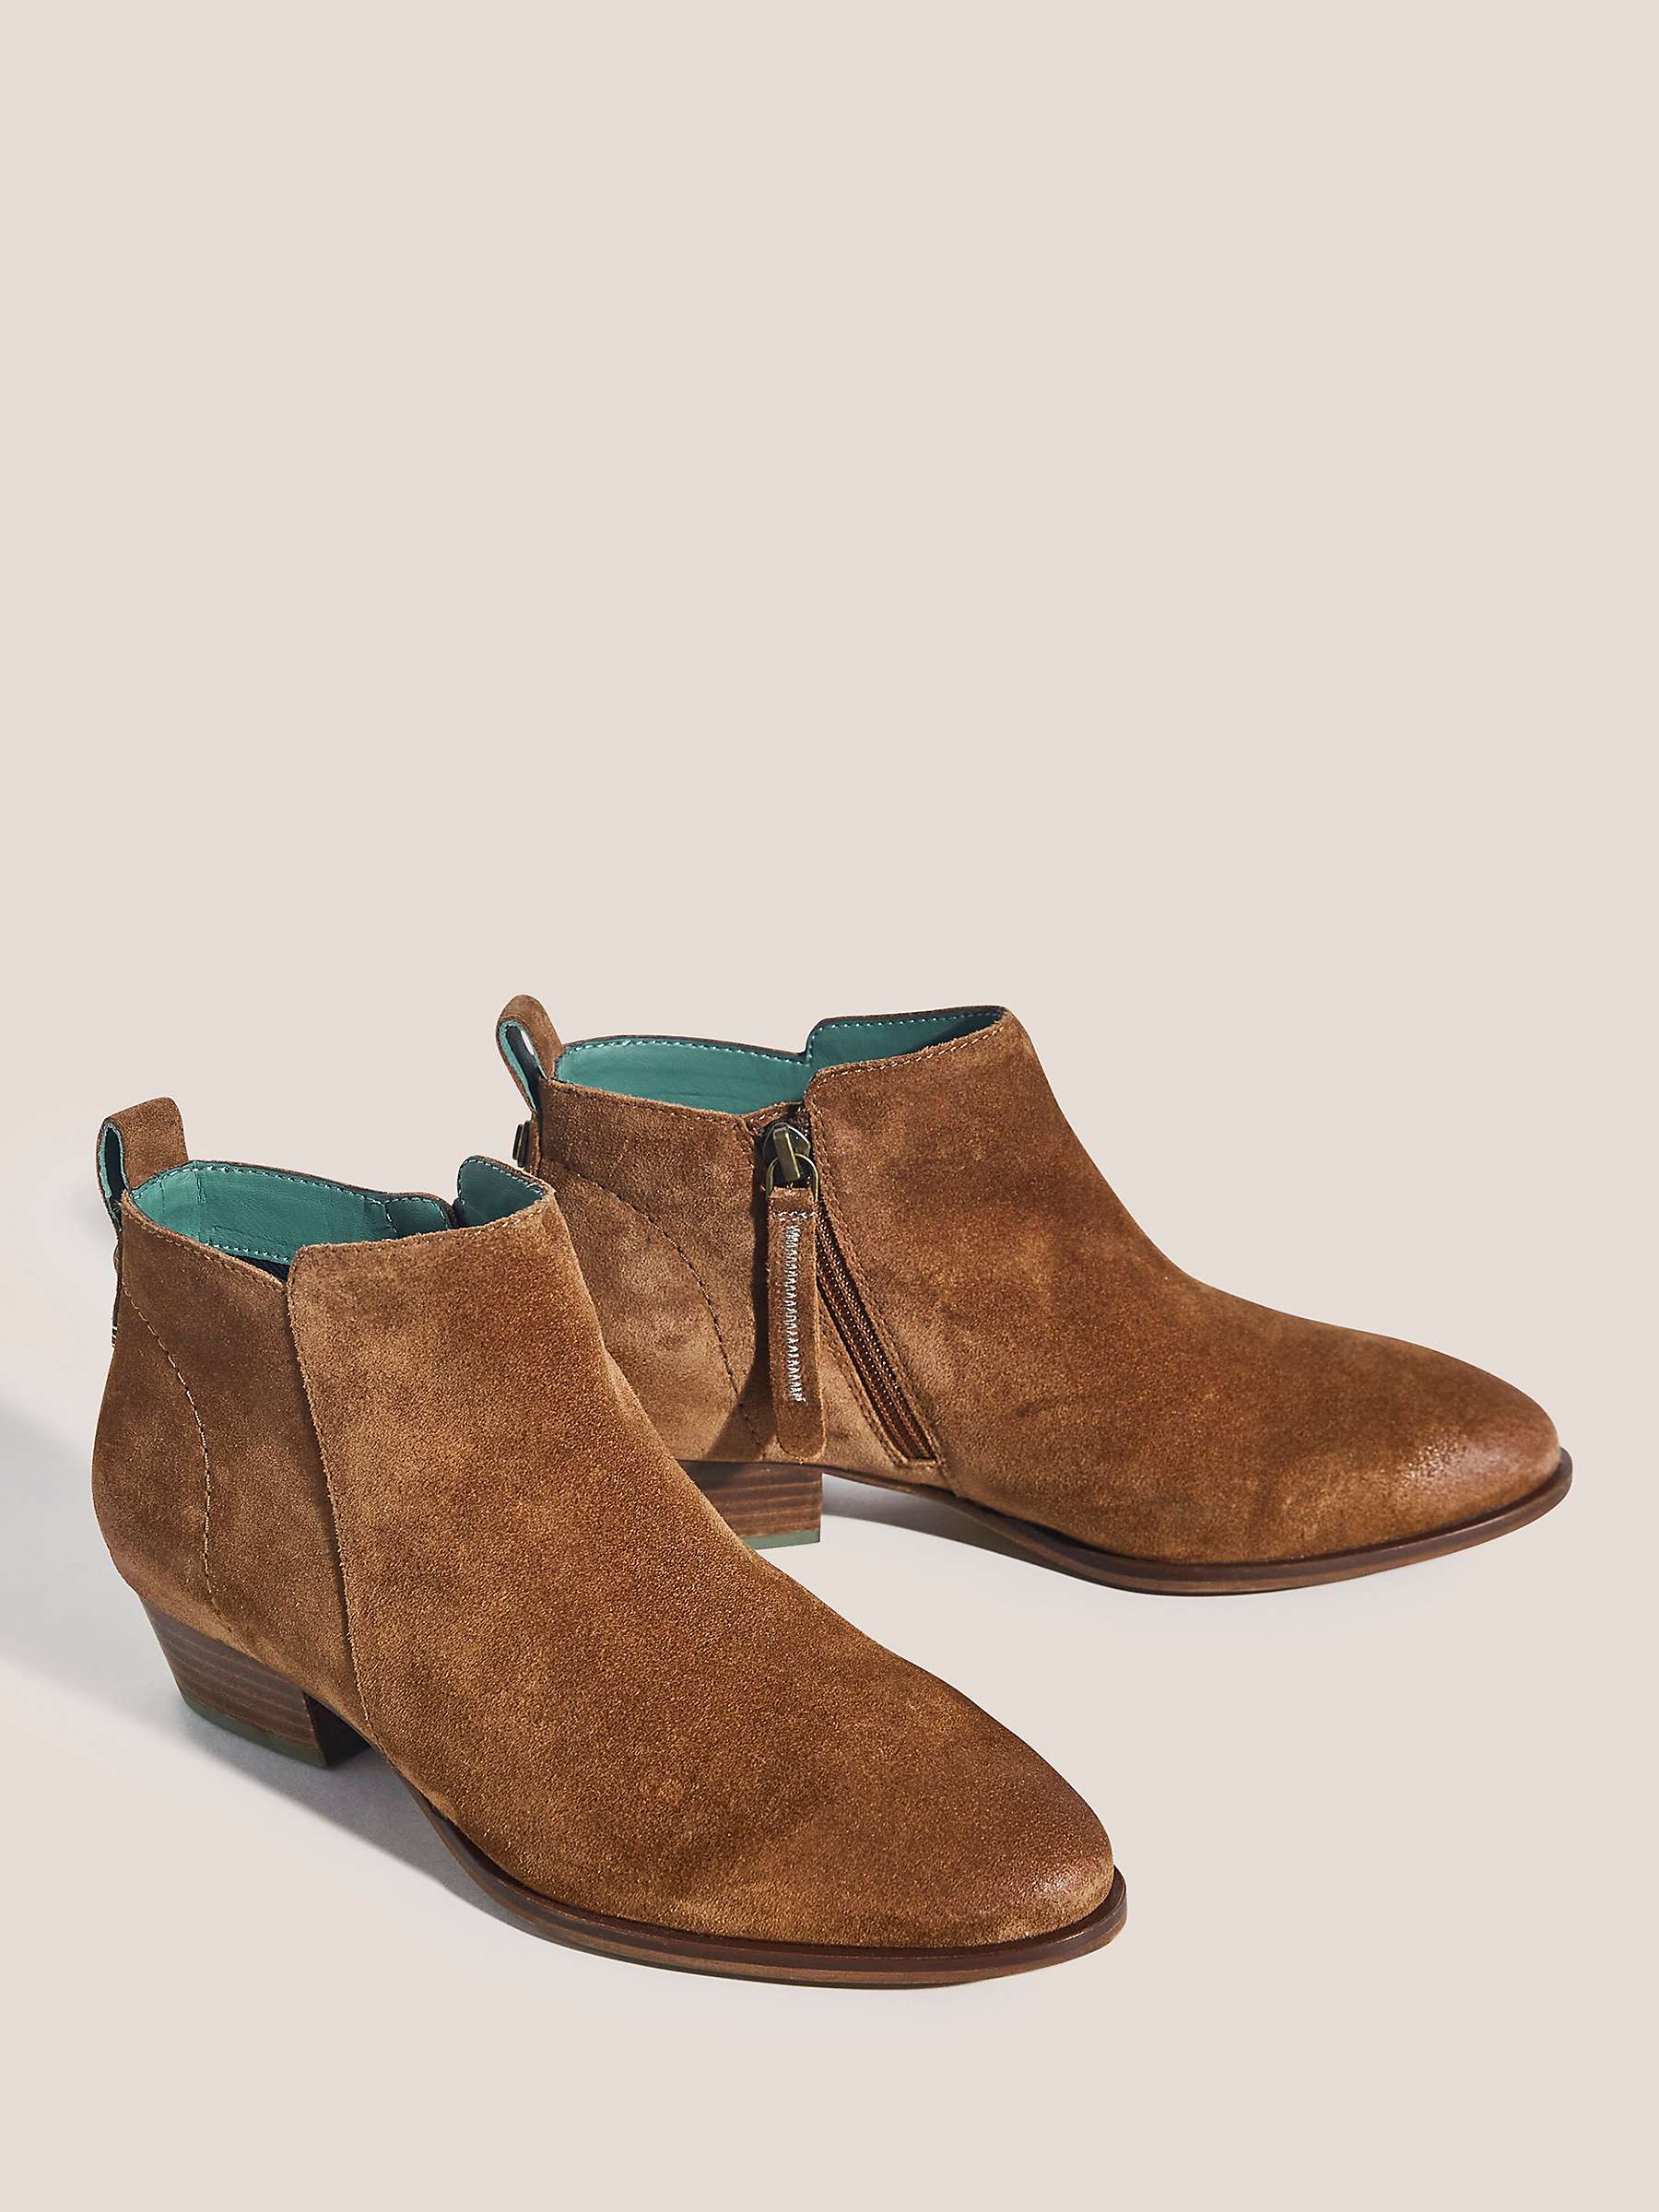 Buy White Stuff Suede Ankle Boots Online at johnlewis.com